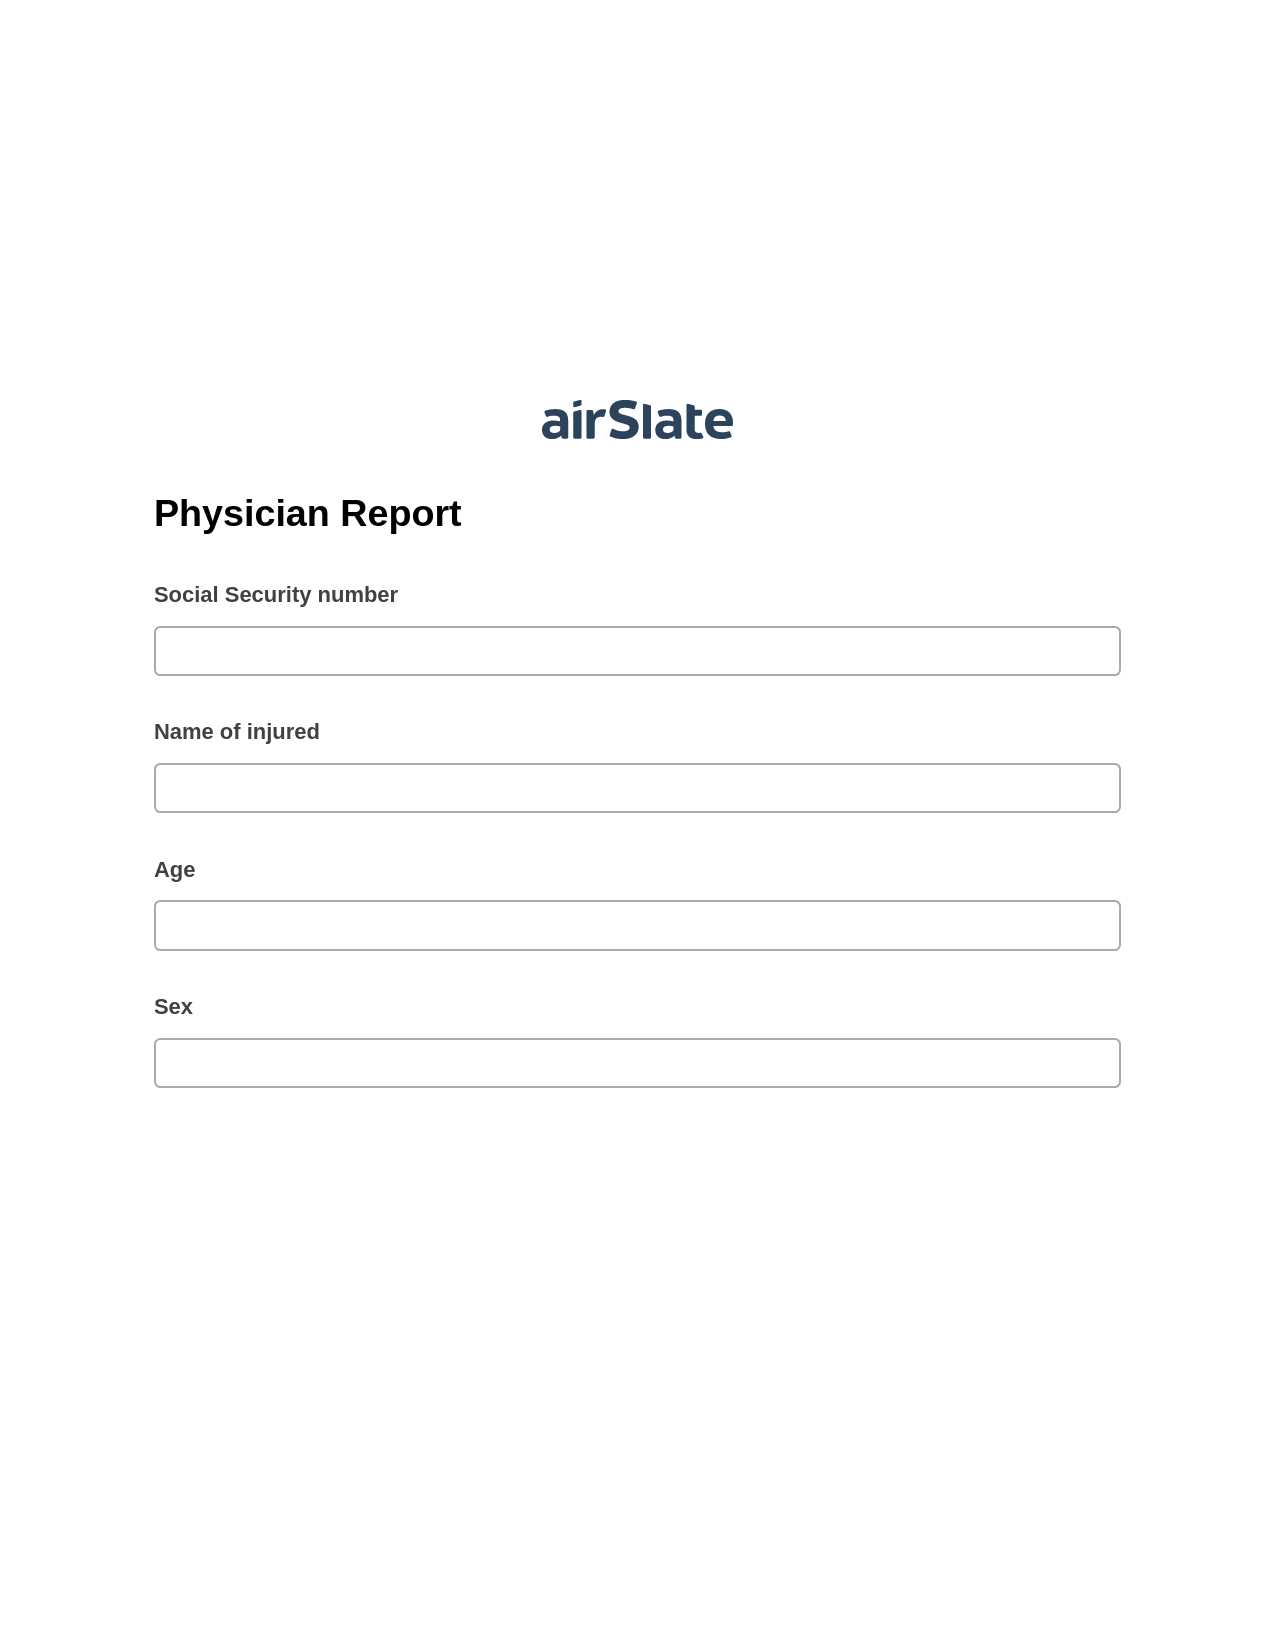 Multirole Physician Report Pre-fill from Smartsheet Bot, Update MS Dynamics 365 Record Bot, Archive to Dropbox Bot